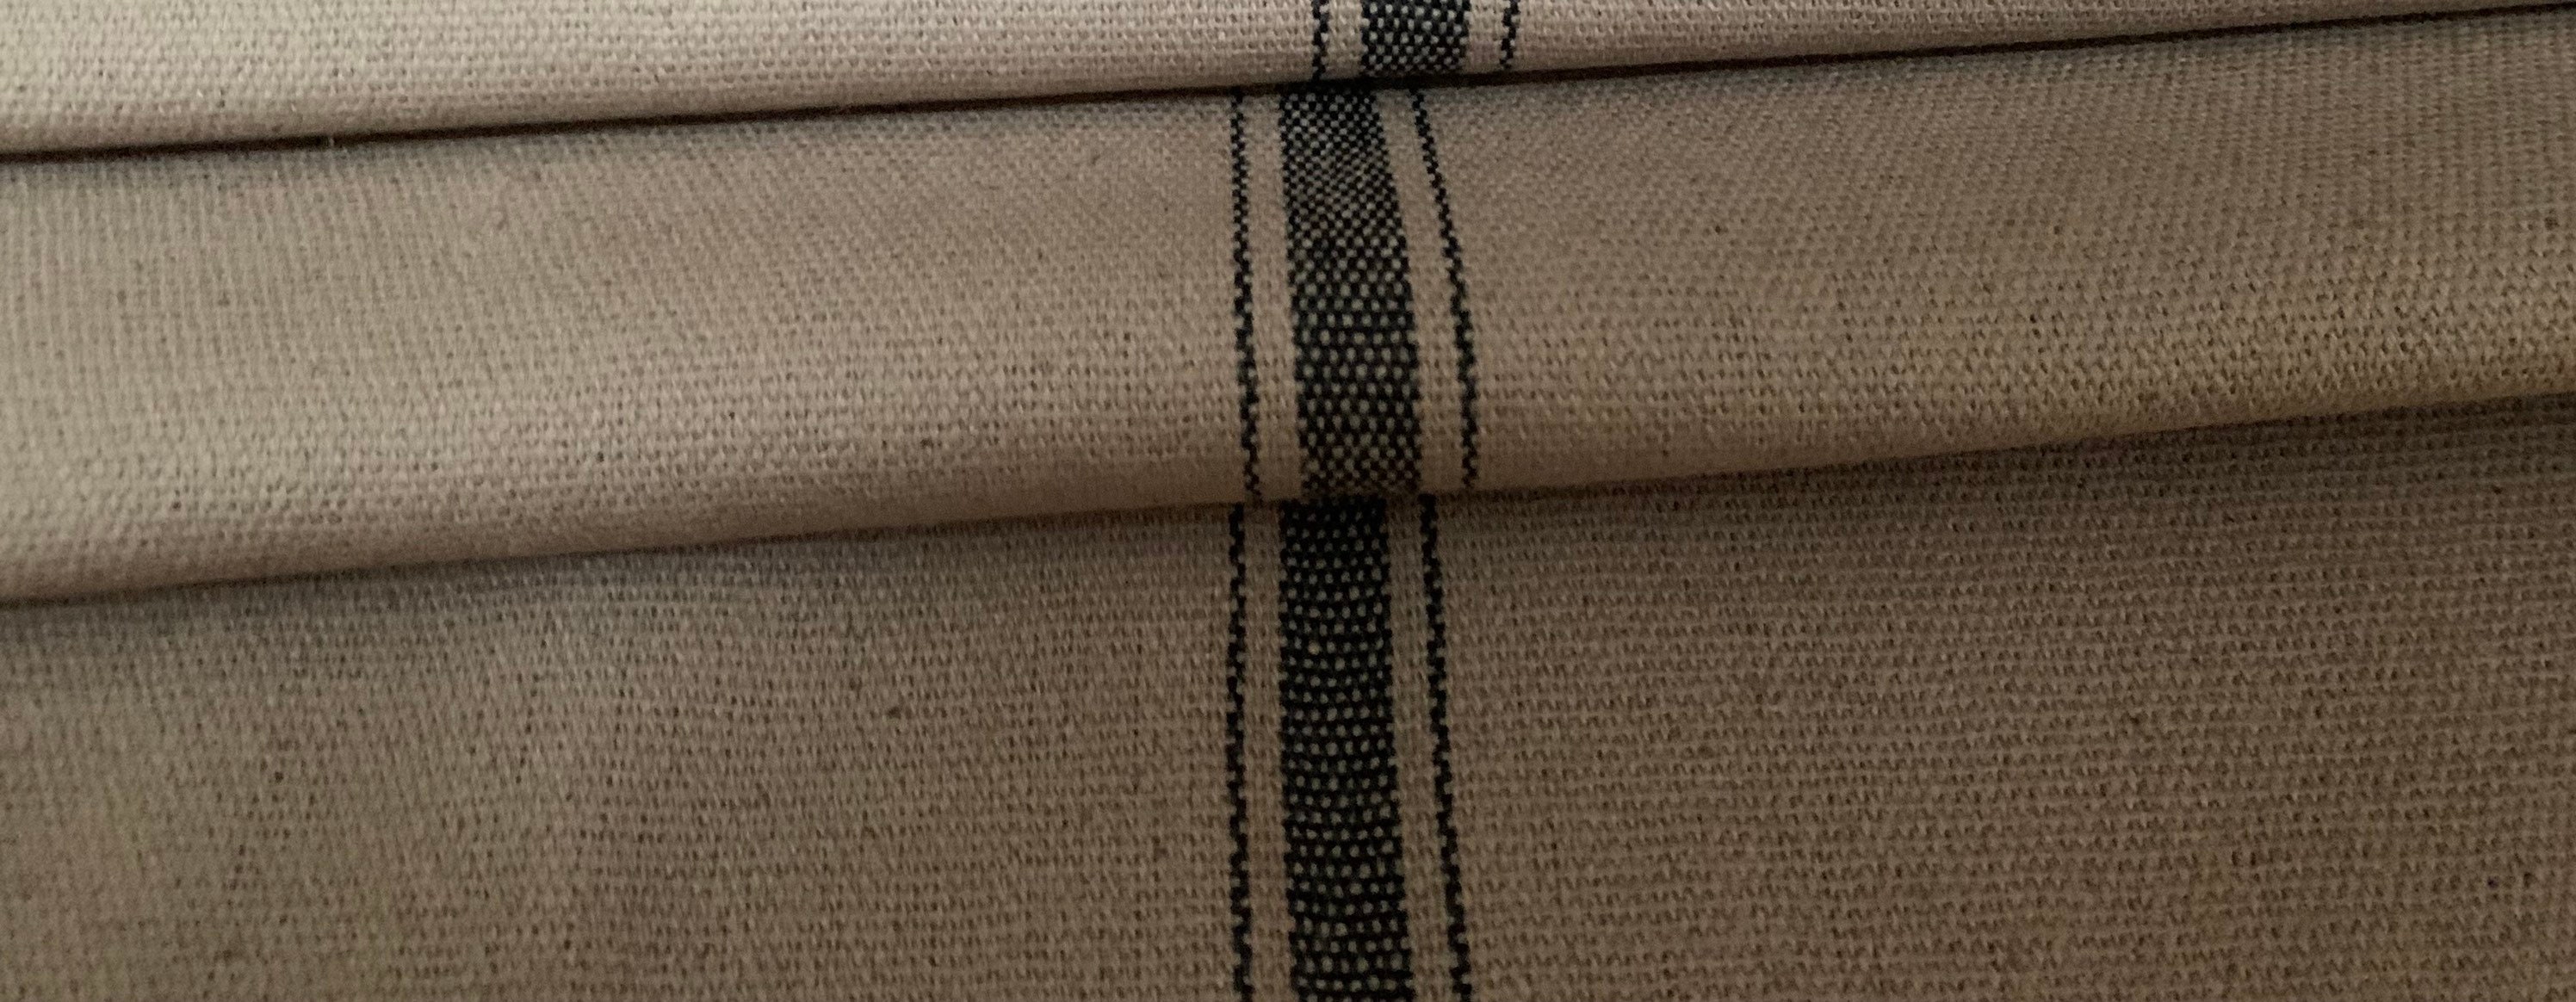 Grain Sack Fabric by the Yard Farmhouse Fabric Ticking Fabric Upholstery  Fabric 12 Stripe Fabric Beige Background 54 Wide -  Norway